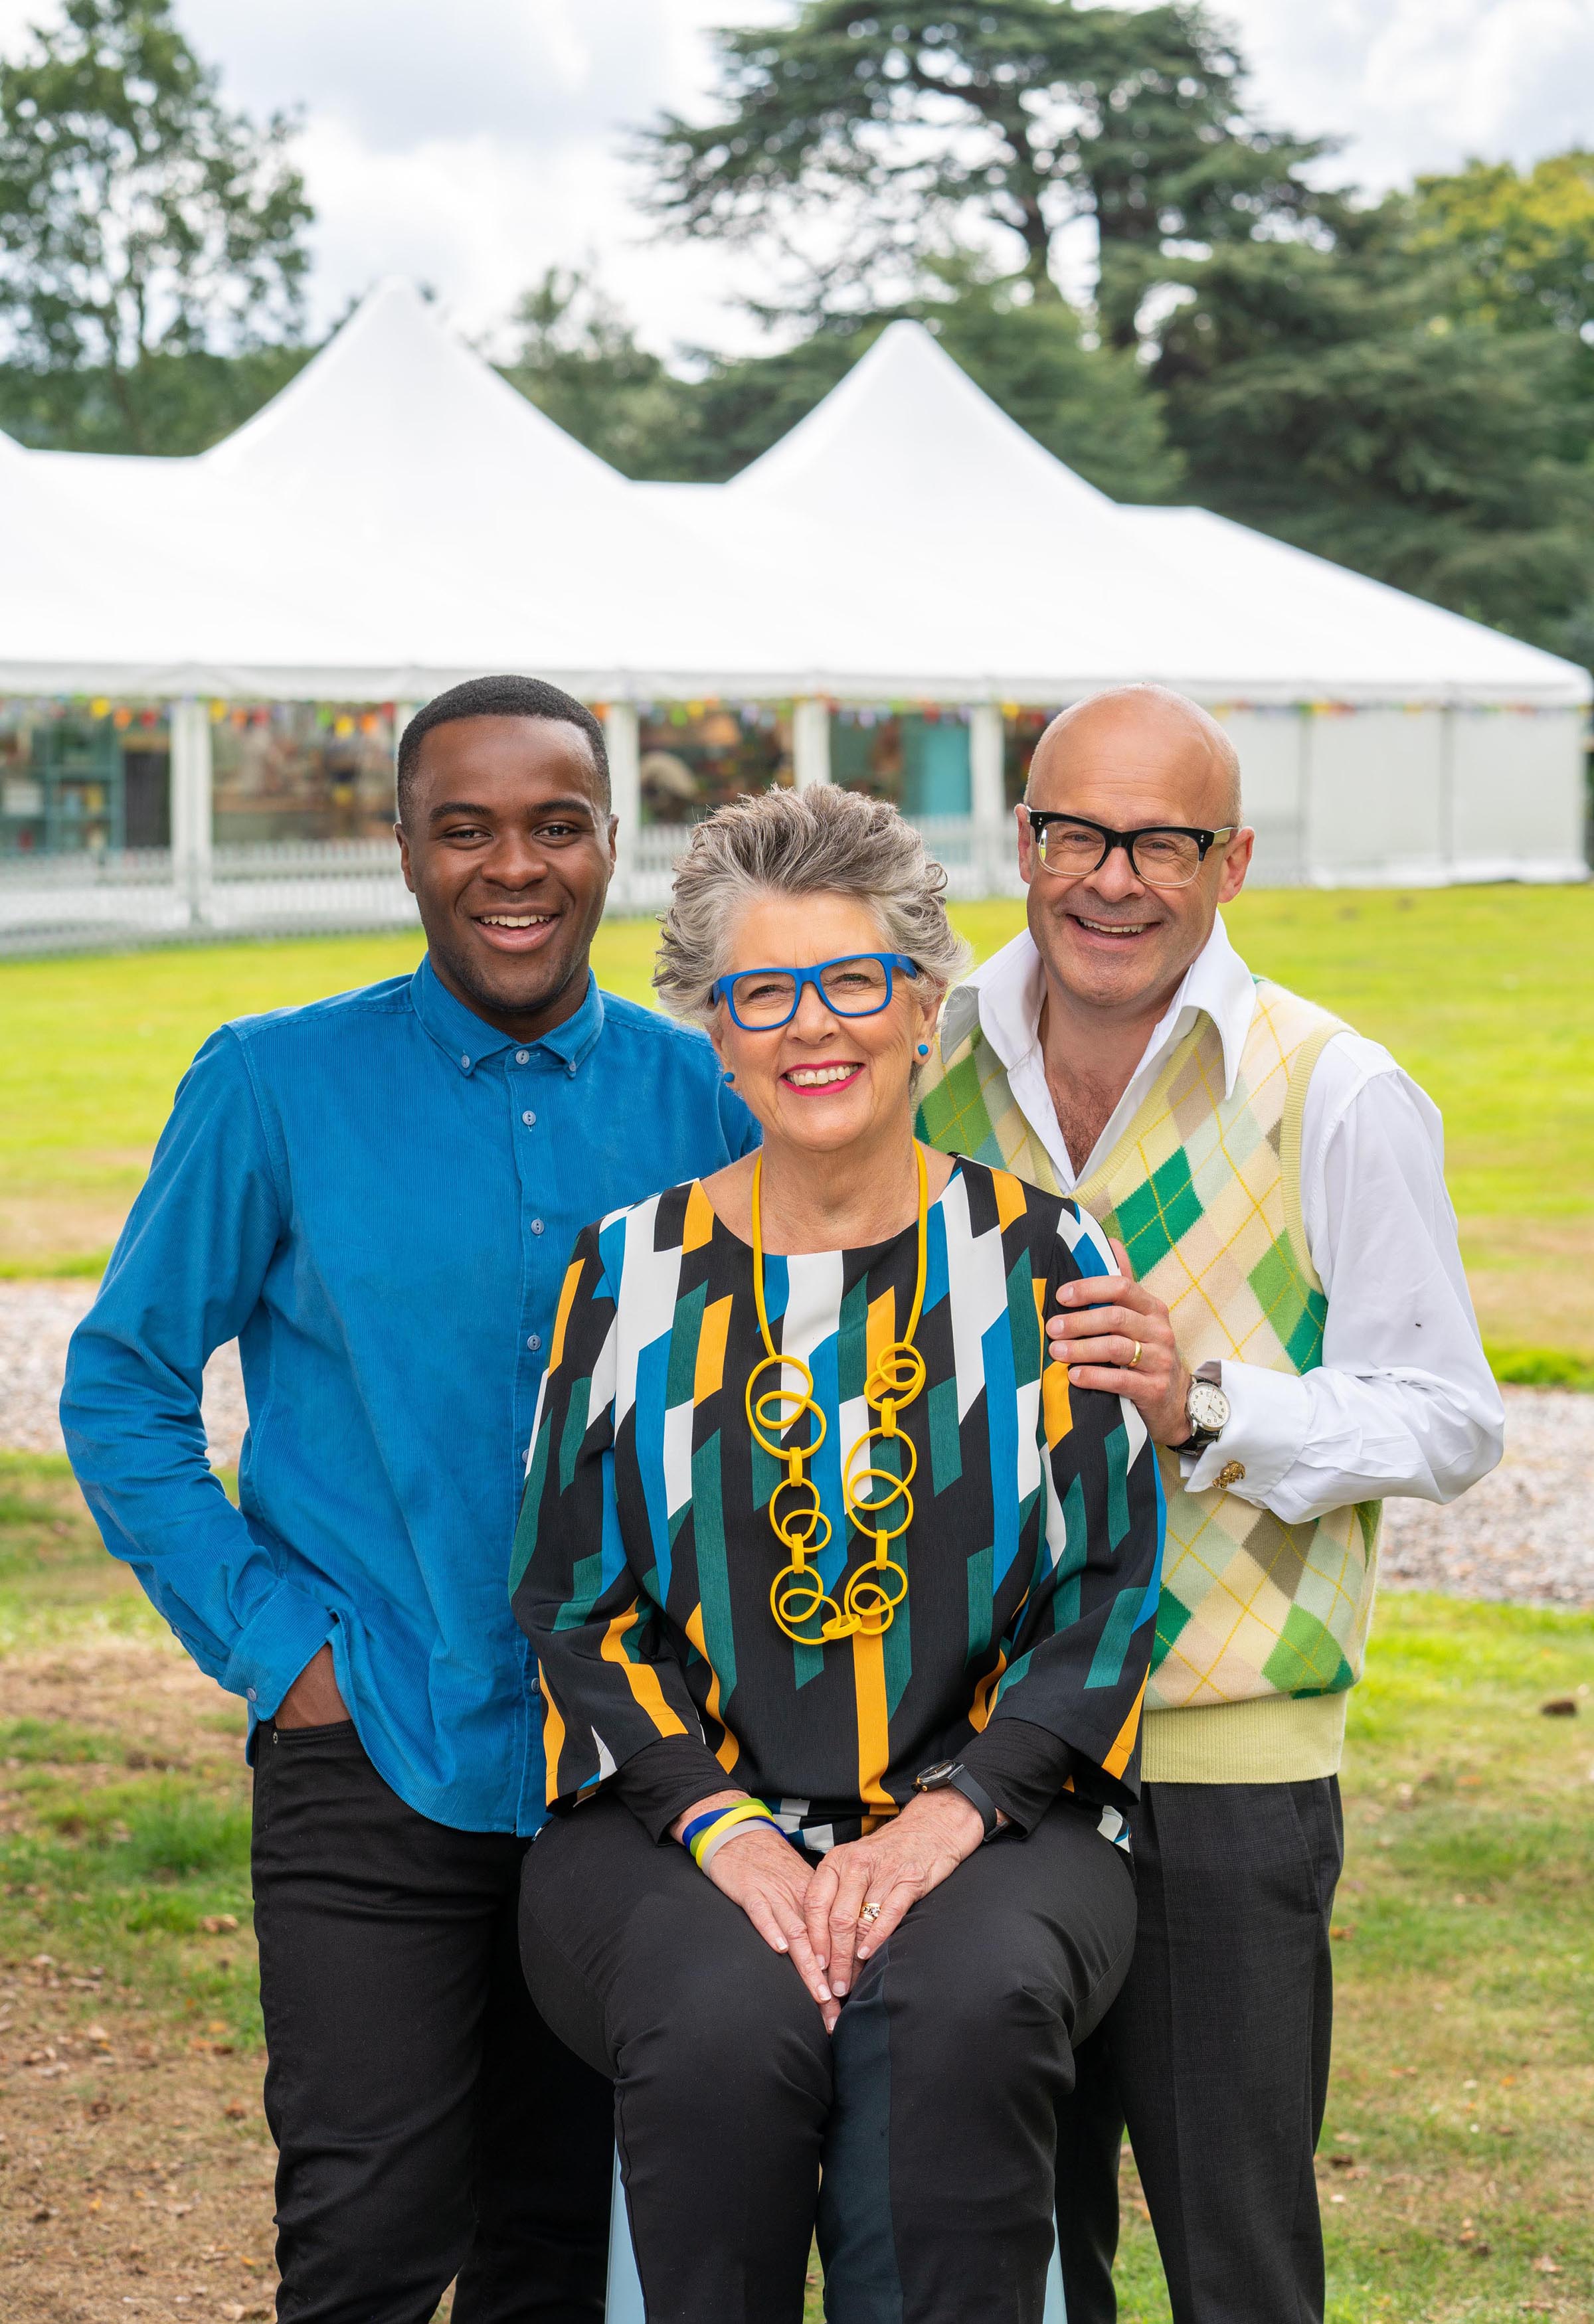 Prue Leith, Harry Hill and Liam Charles